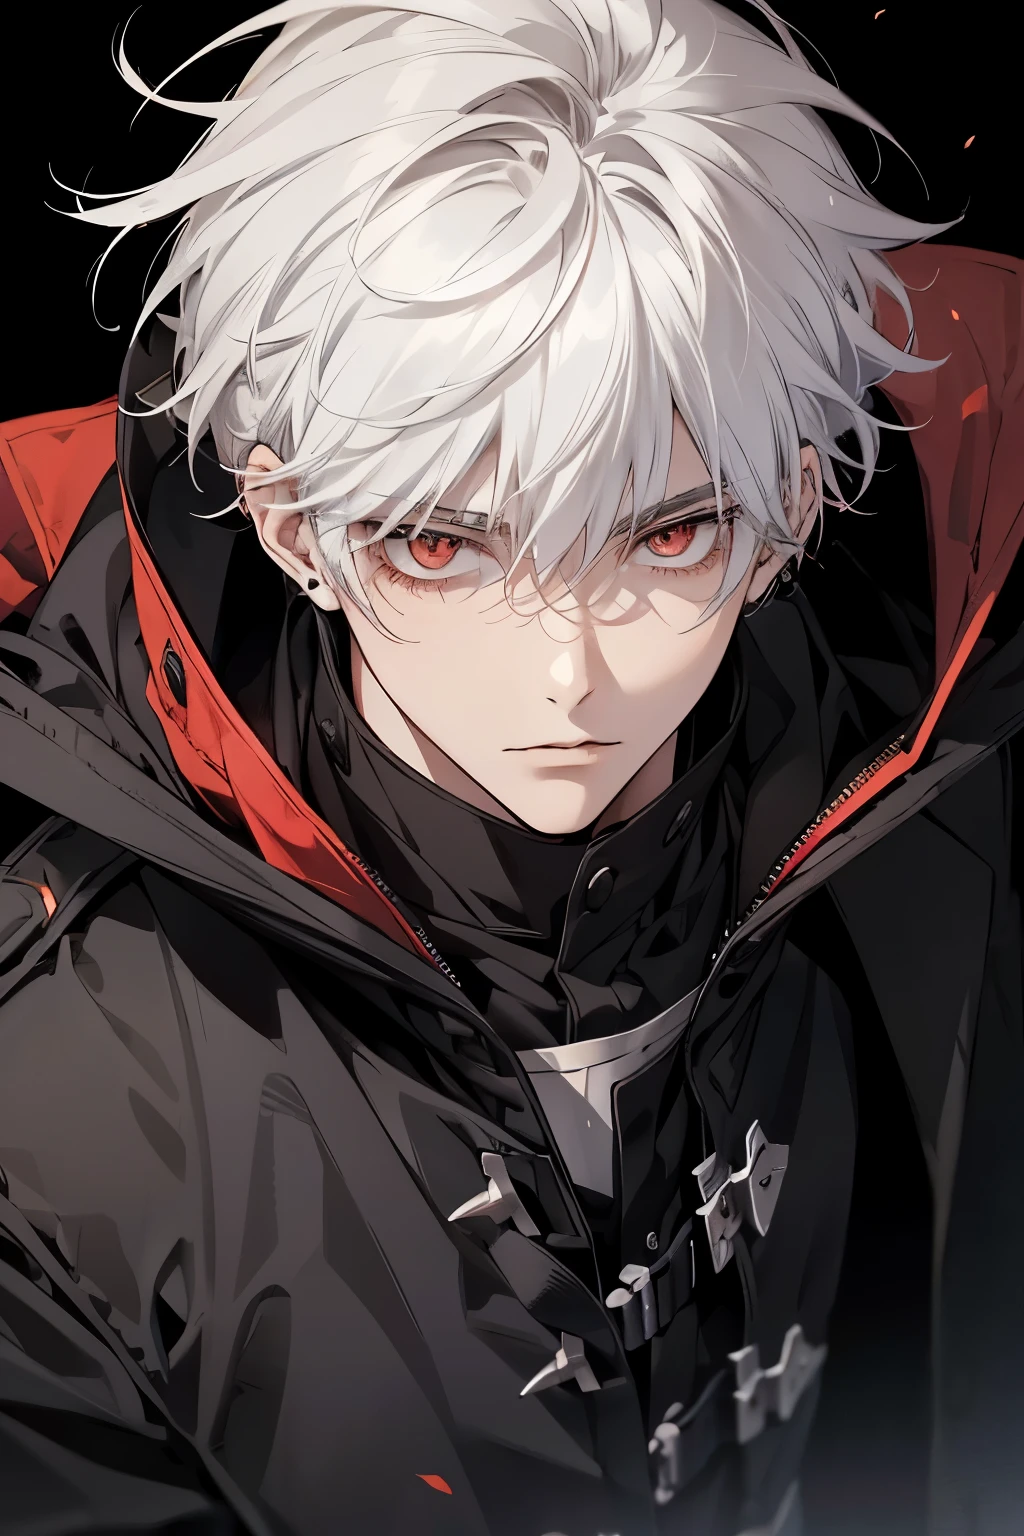 1male, calm, age 25 face, short messy with bangs, white hair, Red colored eyes, Black Coat, black clothes, black background, adult face, modern times, close up, instrument, ear piercing